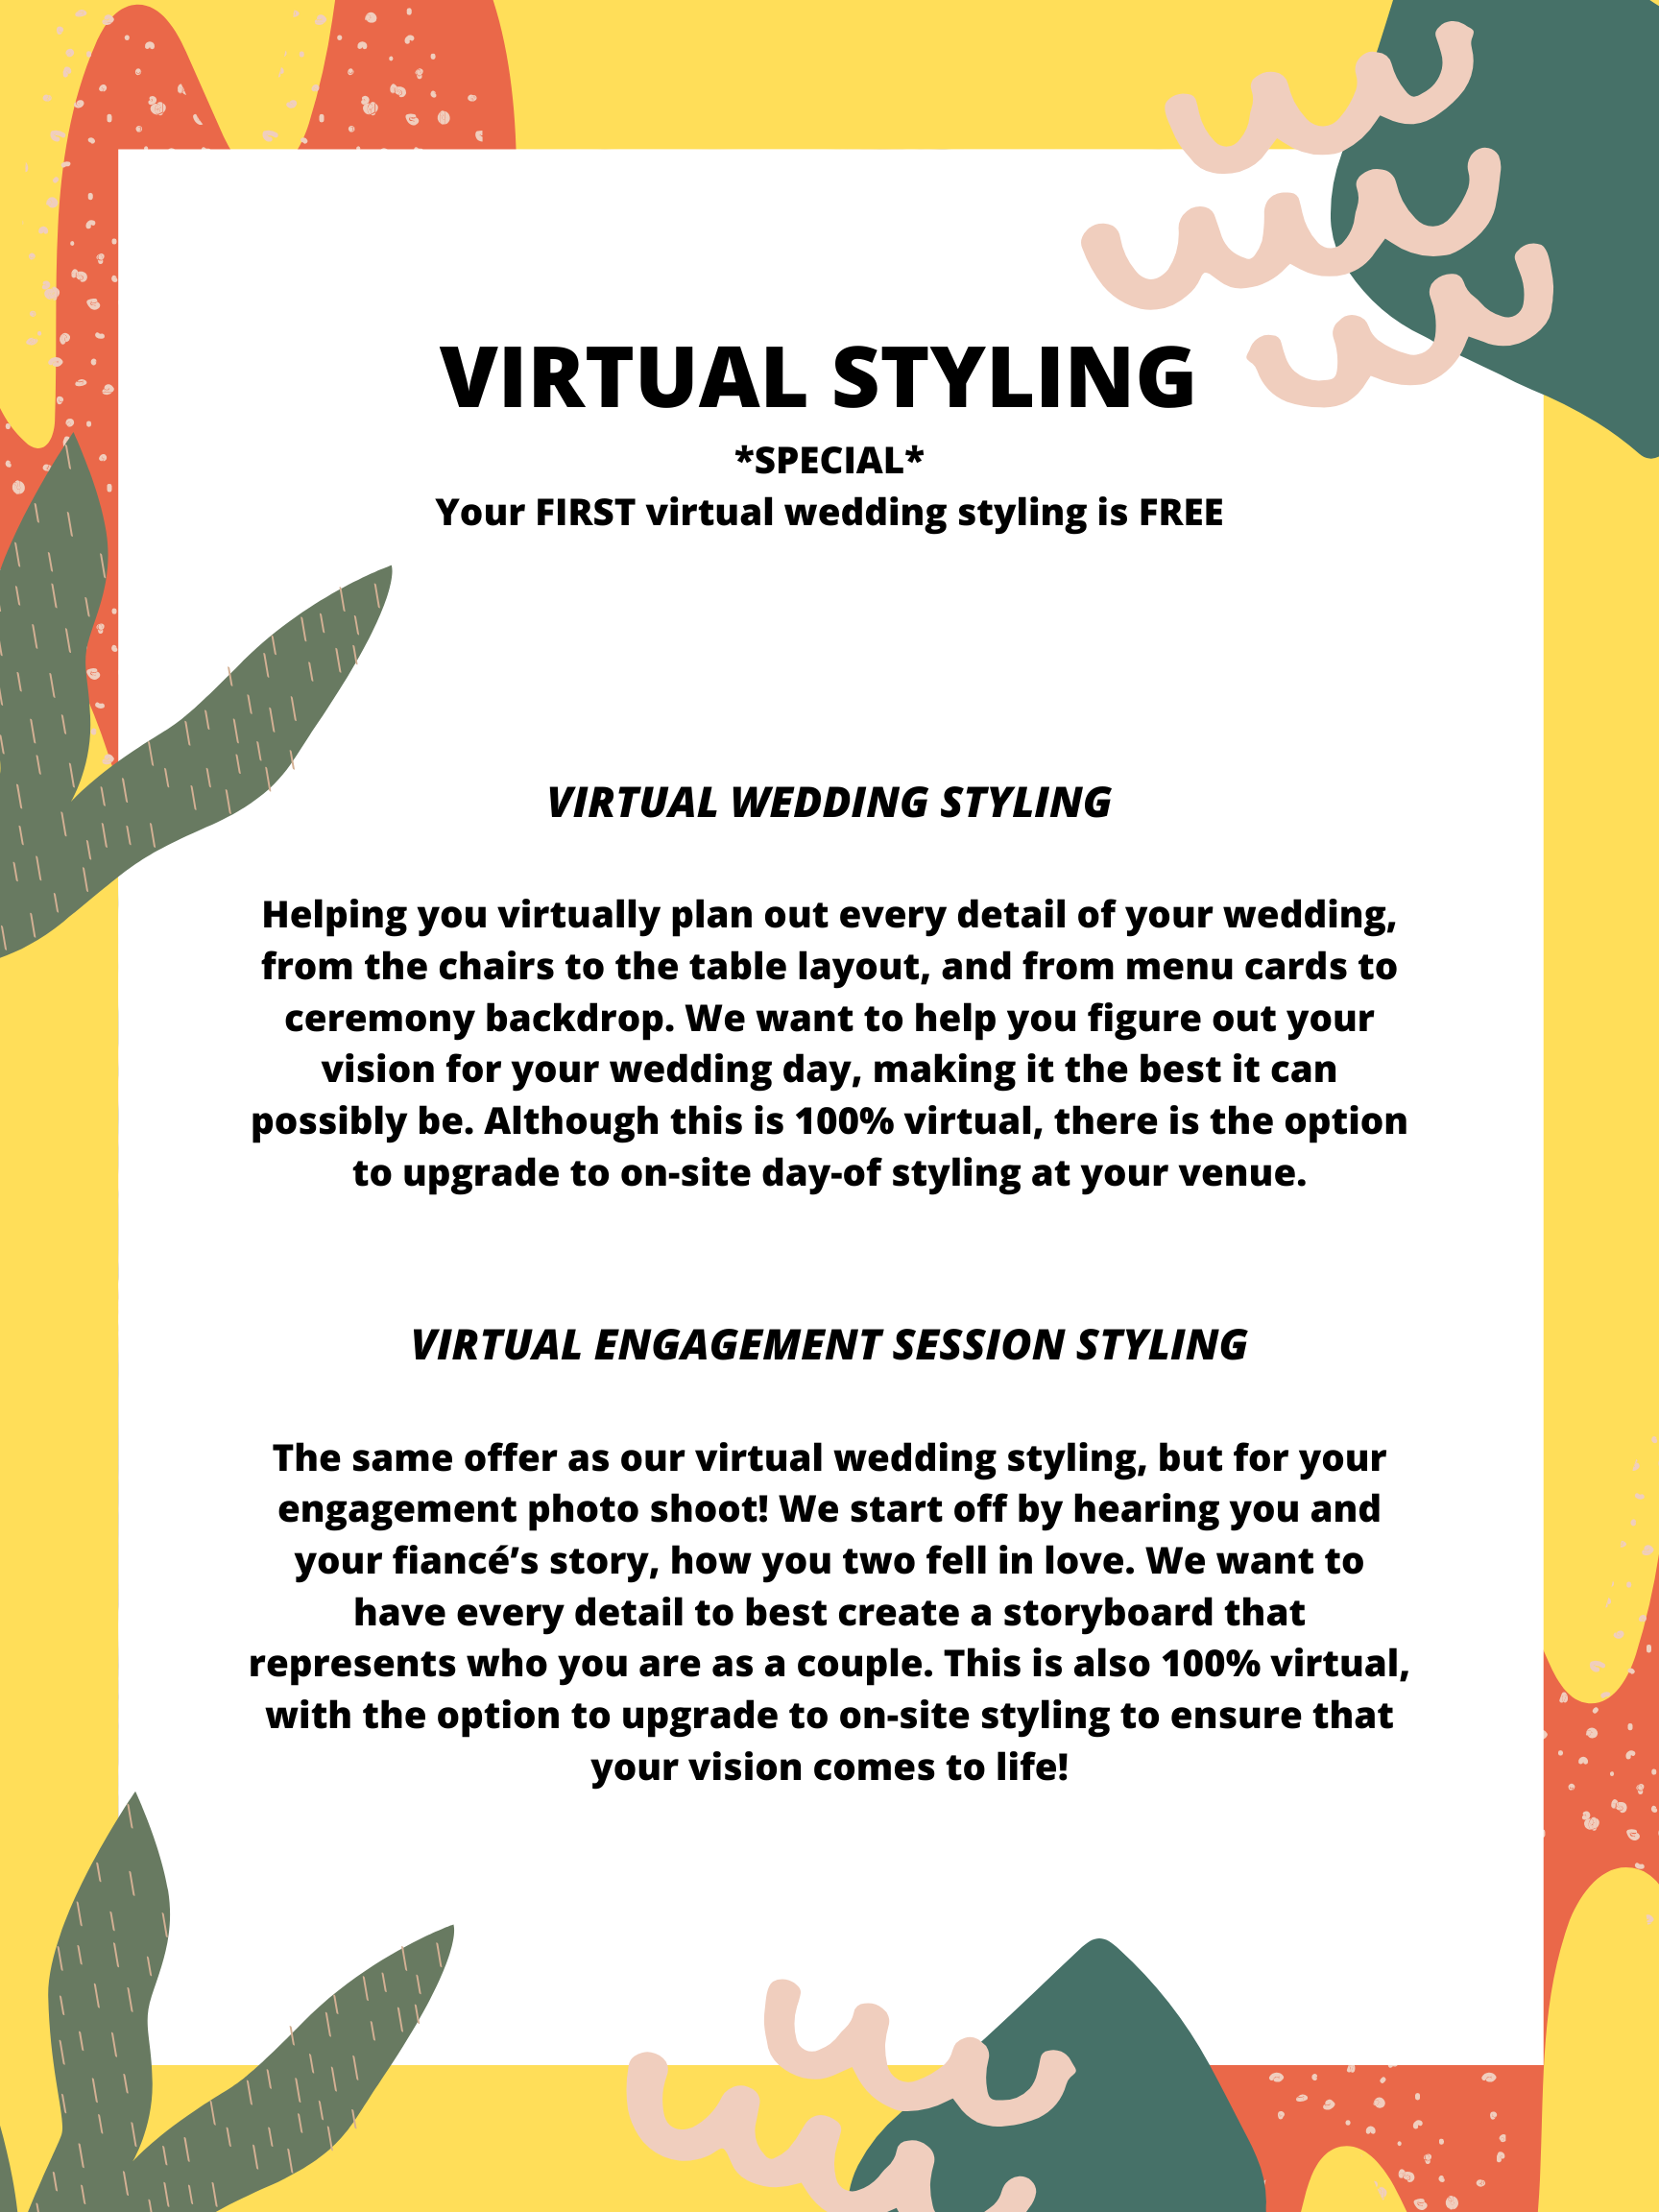 ivory-and-beau-blog-current-happenings-virtual-wedding-styling-spread-love-not-germs-wedding-planner-savannah-wedding-planner-virtual-wedding-planning-social-distancing-2.png